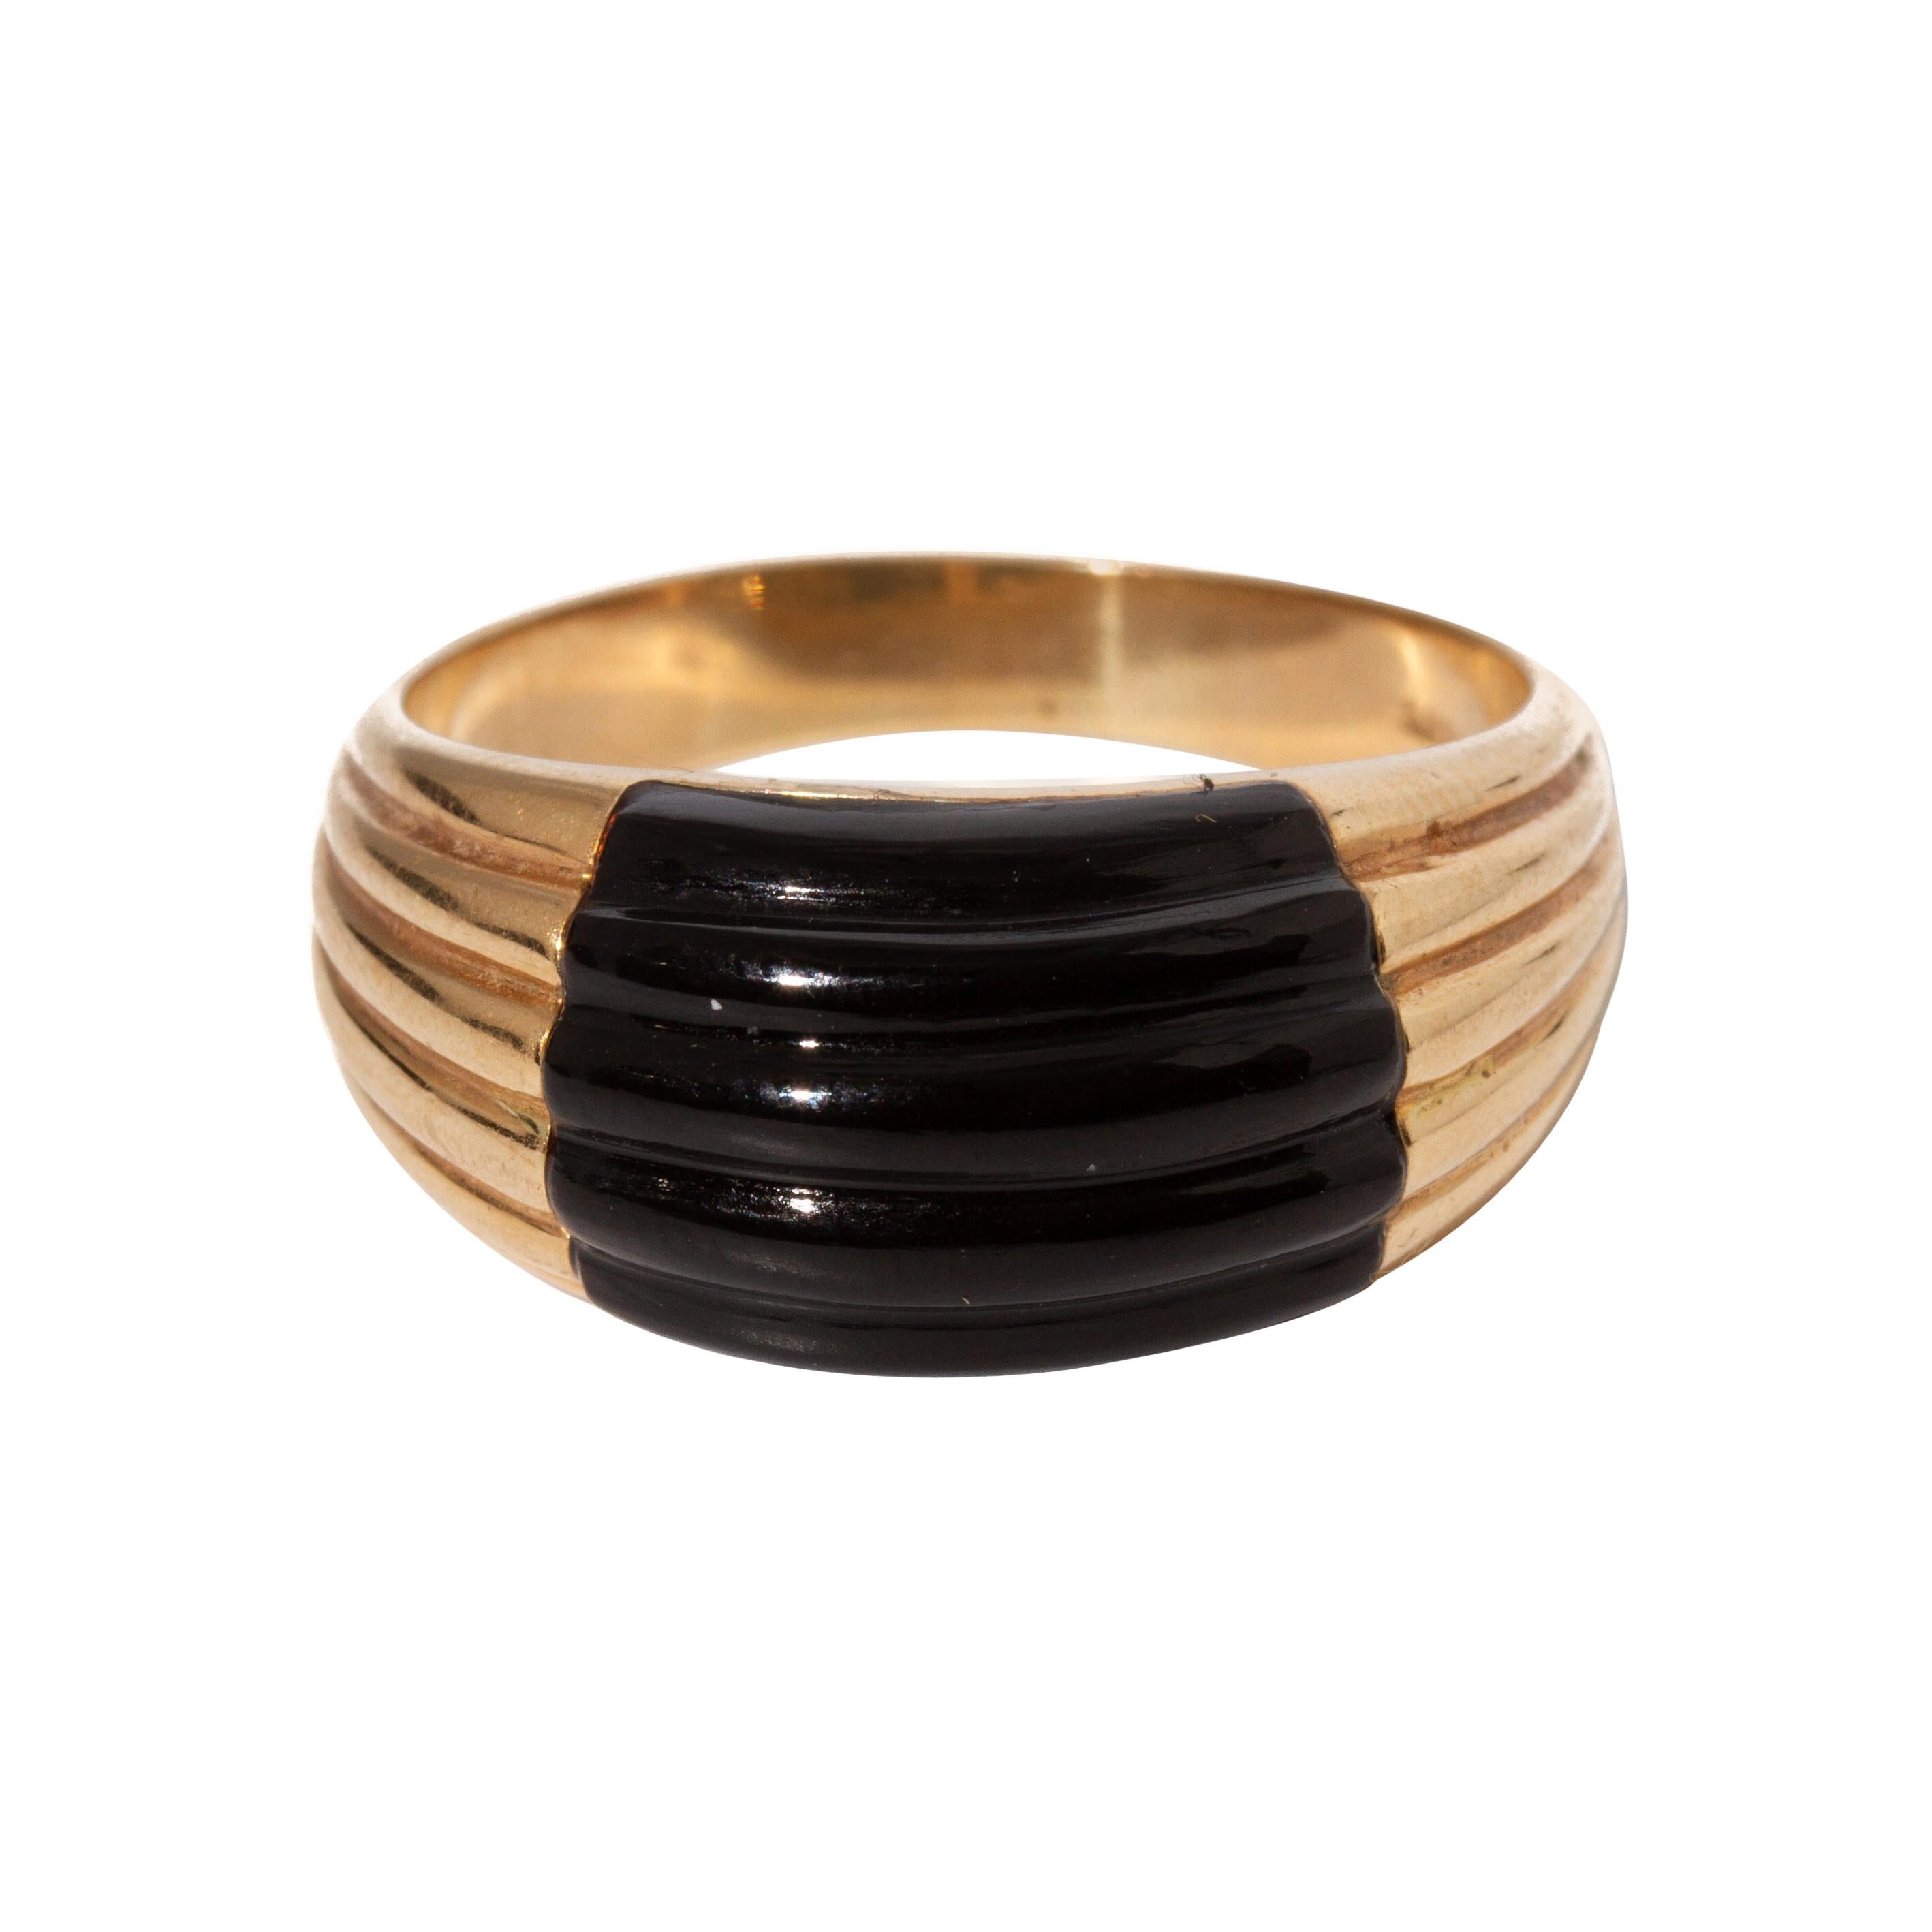 Vintage 14K Yellow Gold Carved Onyx Ring